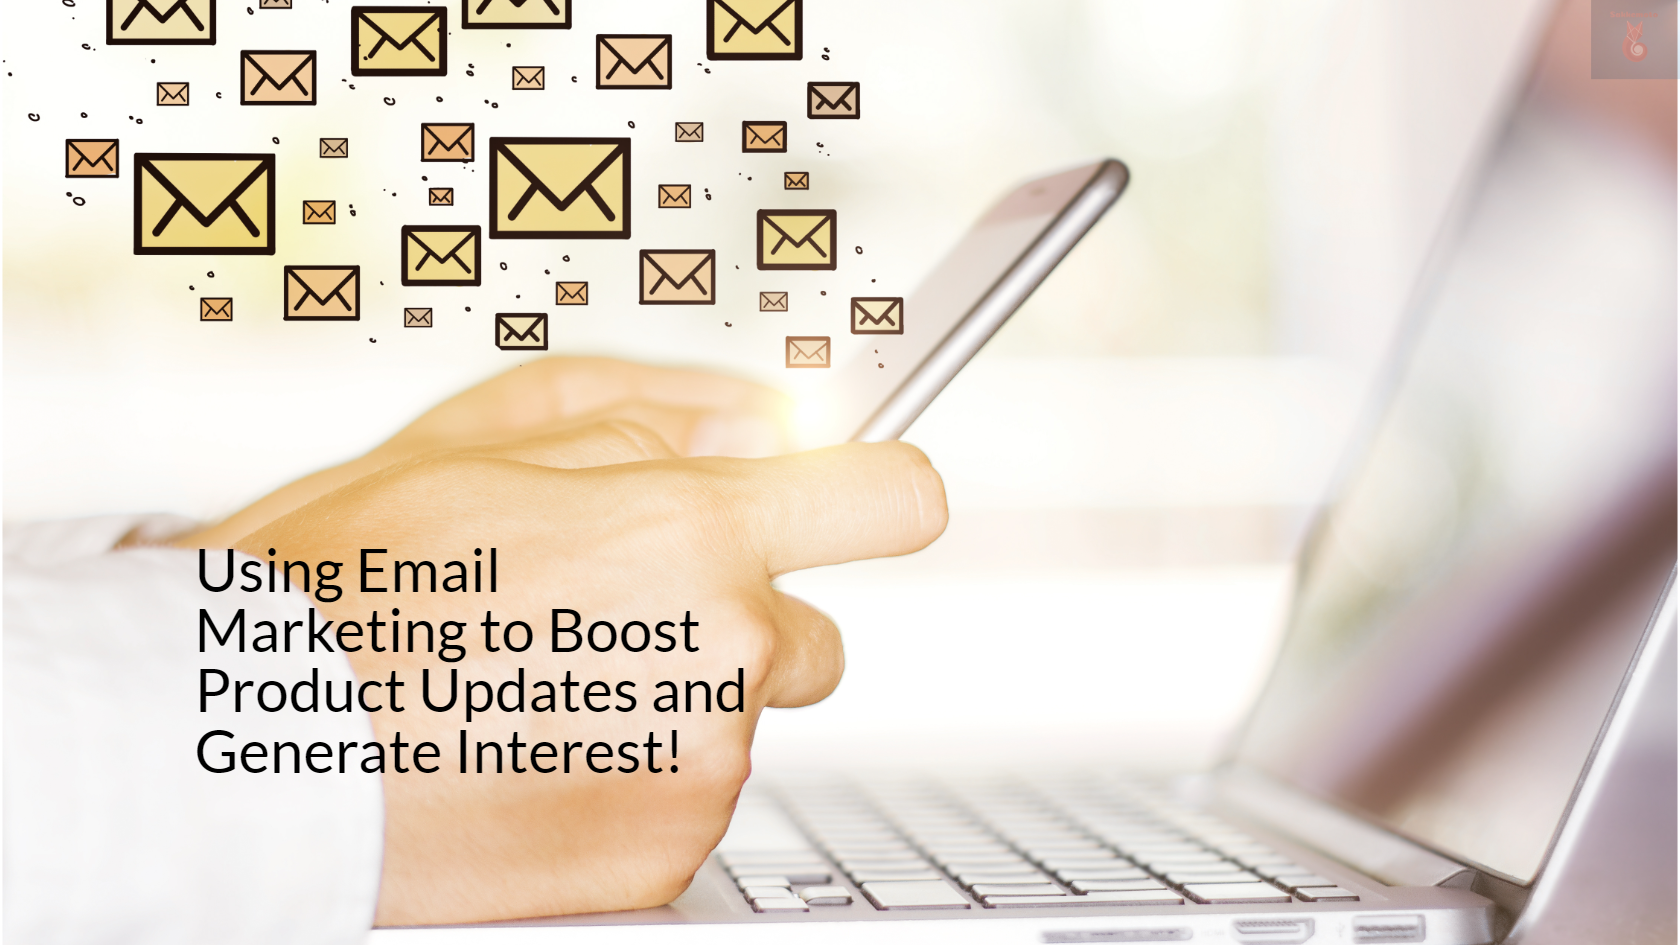 Using Email Marketing to Boost Product Updates and Generate Interest!